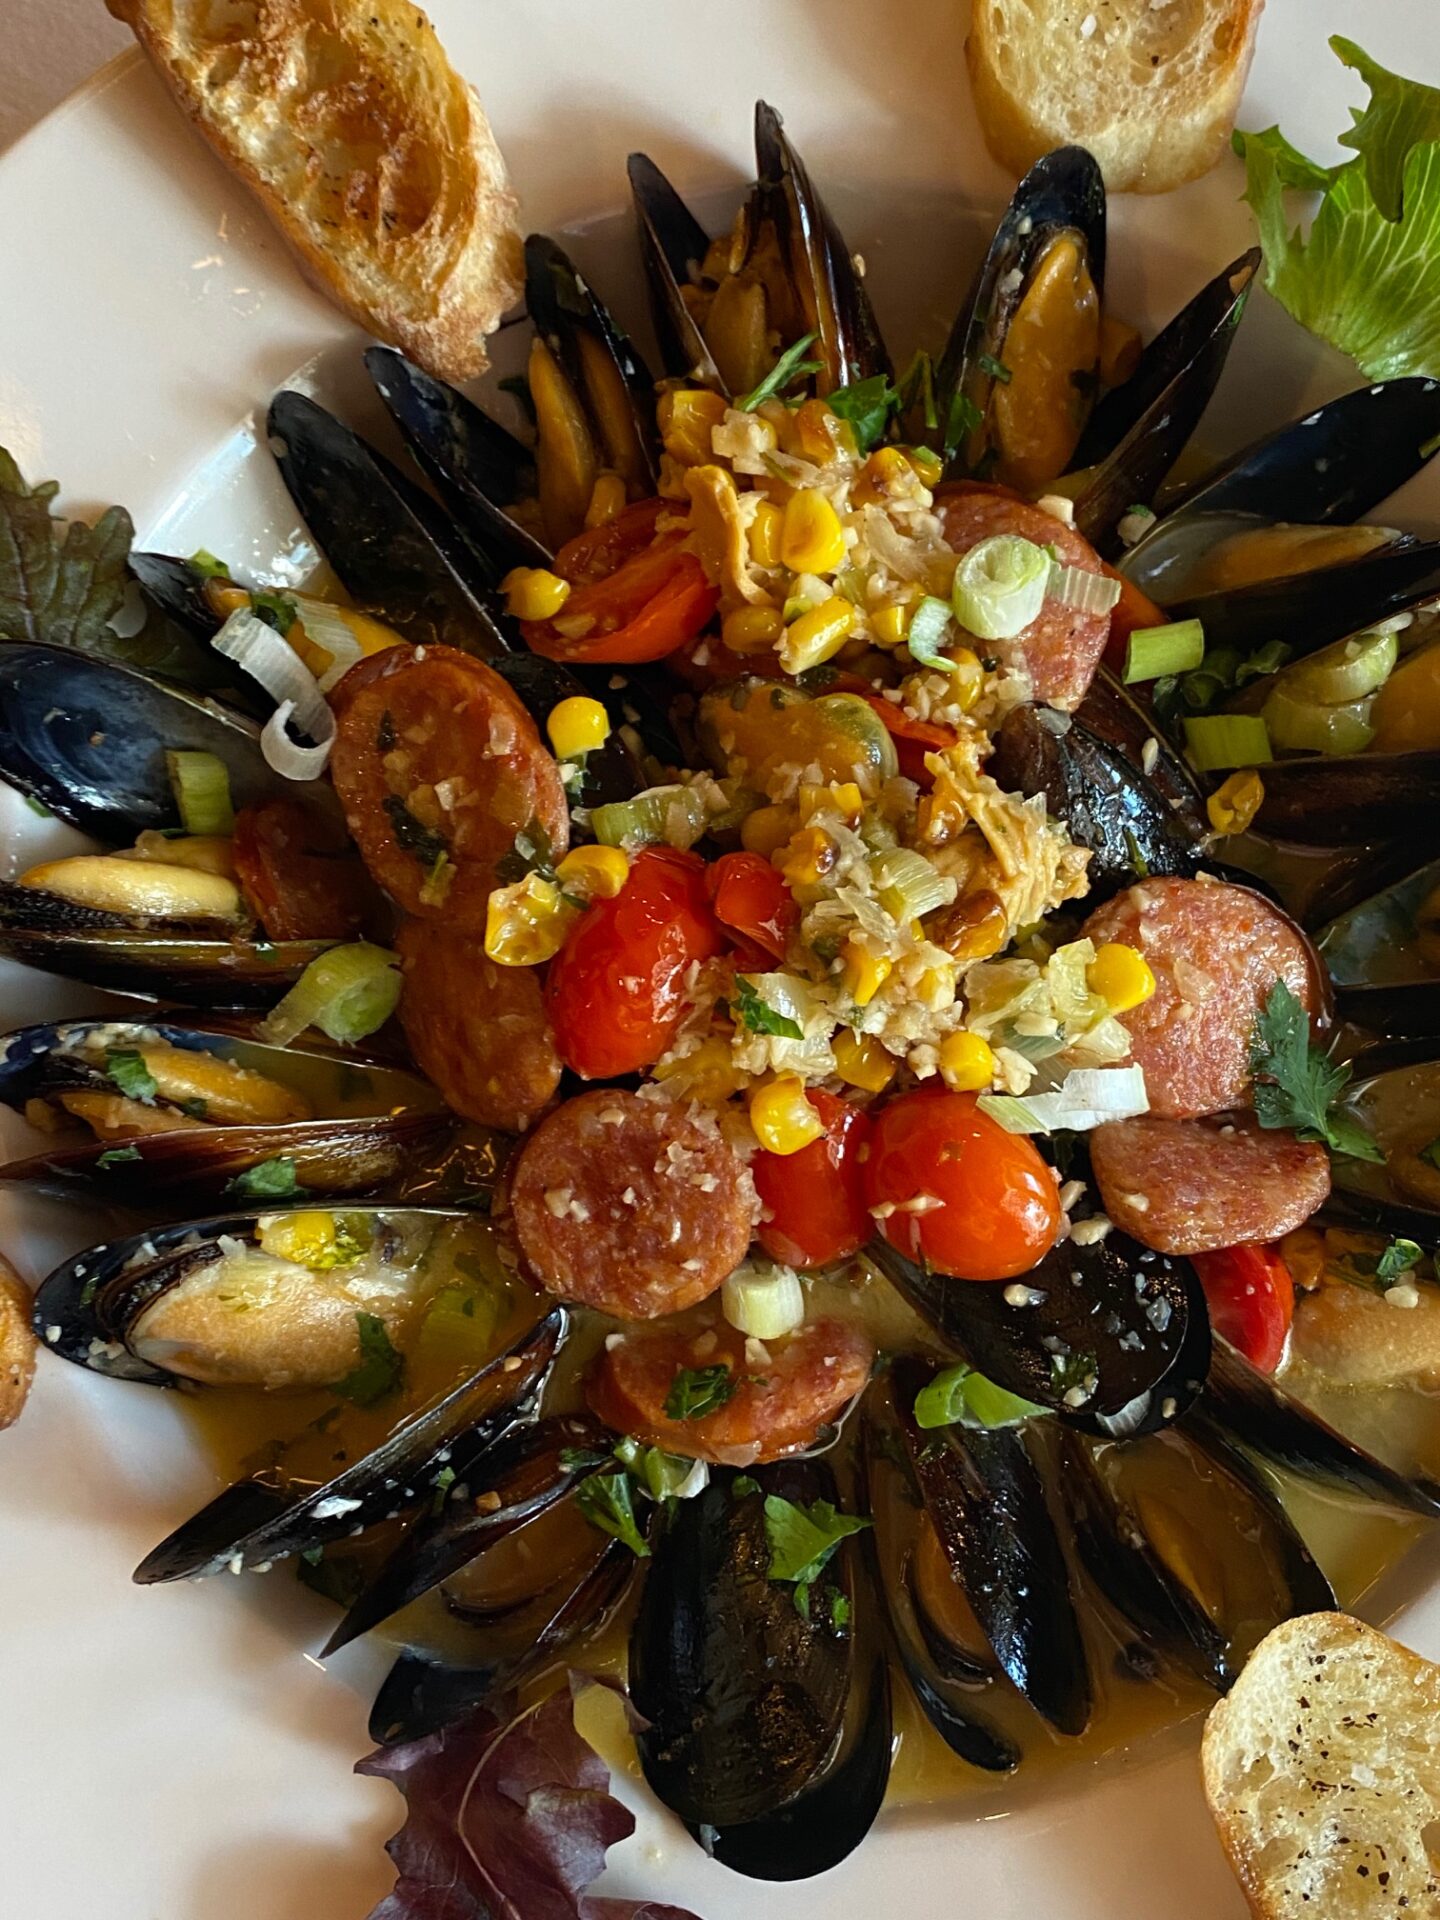 Platter of mussels with corn and tomato garnishing and slices of bread as a side dish